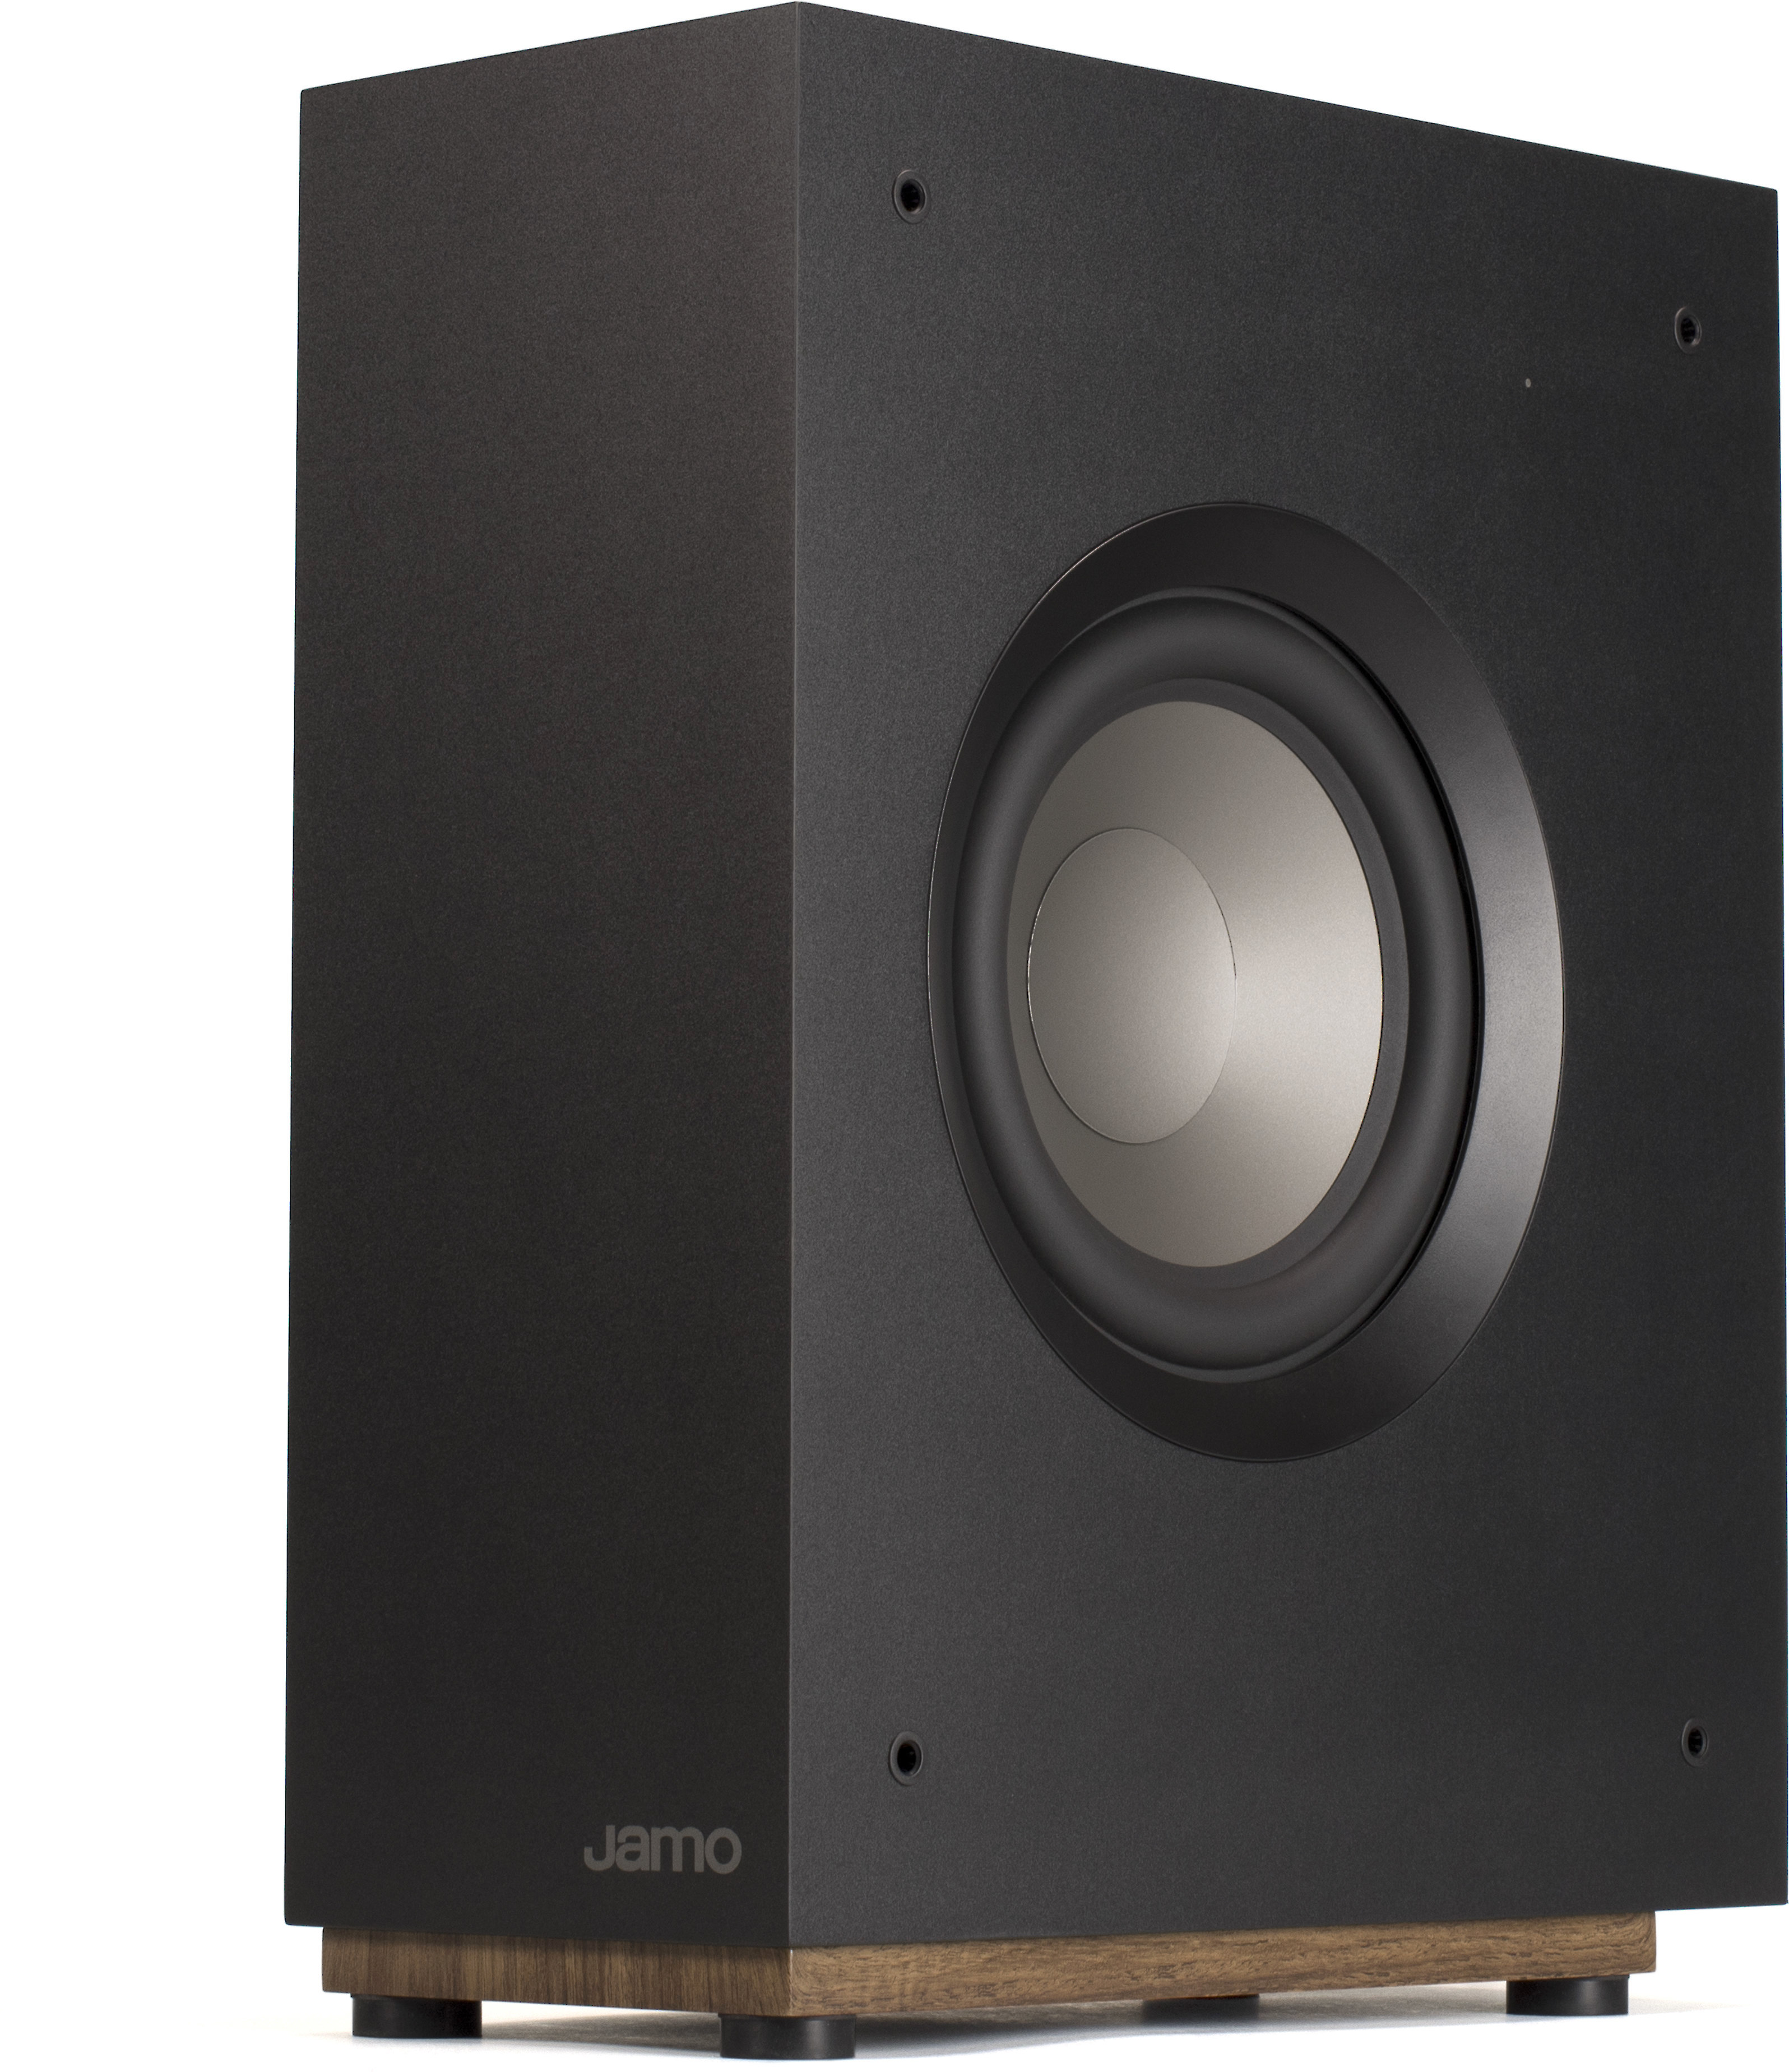 Customer Reviews: S 808 SUB Powered subwoofer at Crutchfield